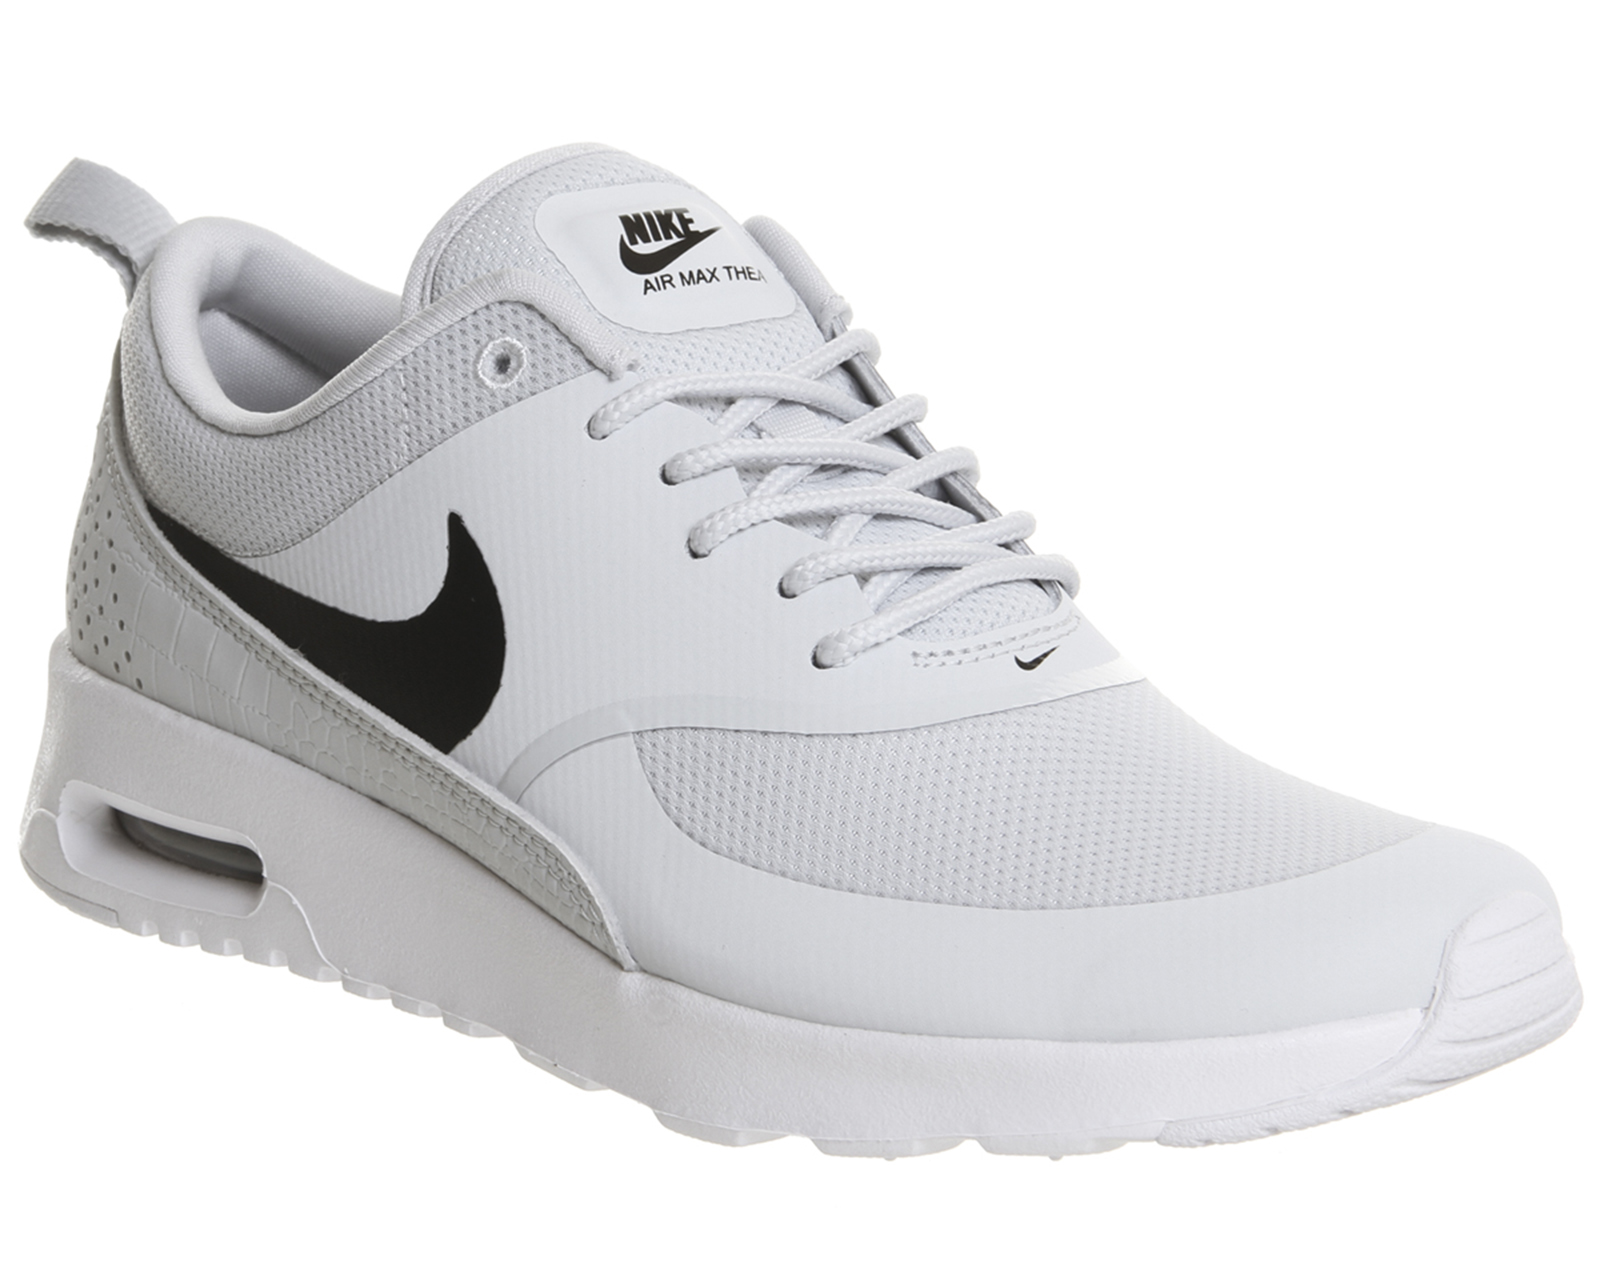 Nike Air Max Thea Pure Platinum Black - Hers trainers